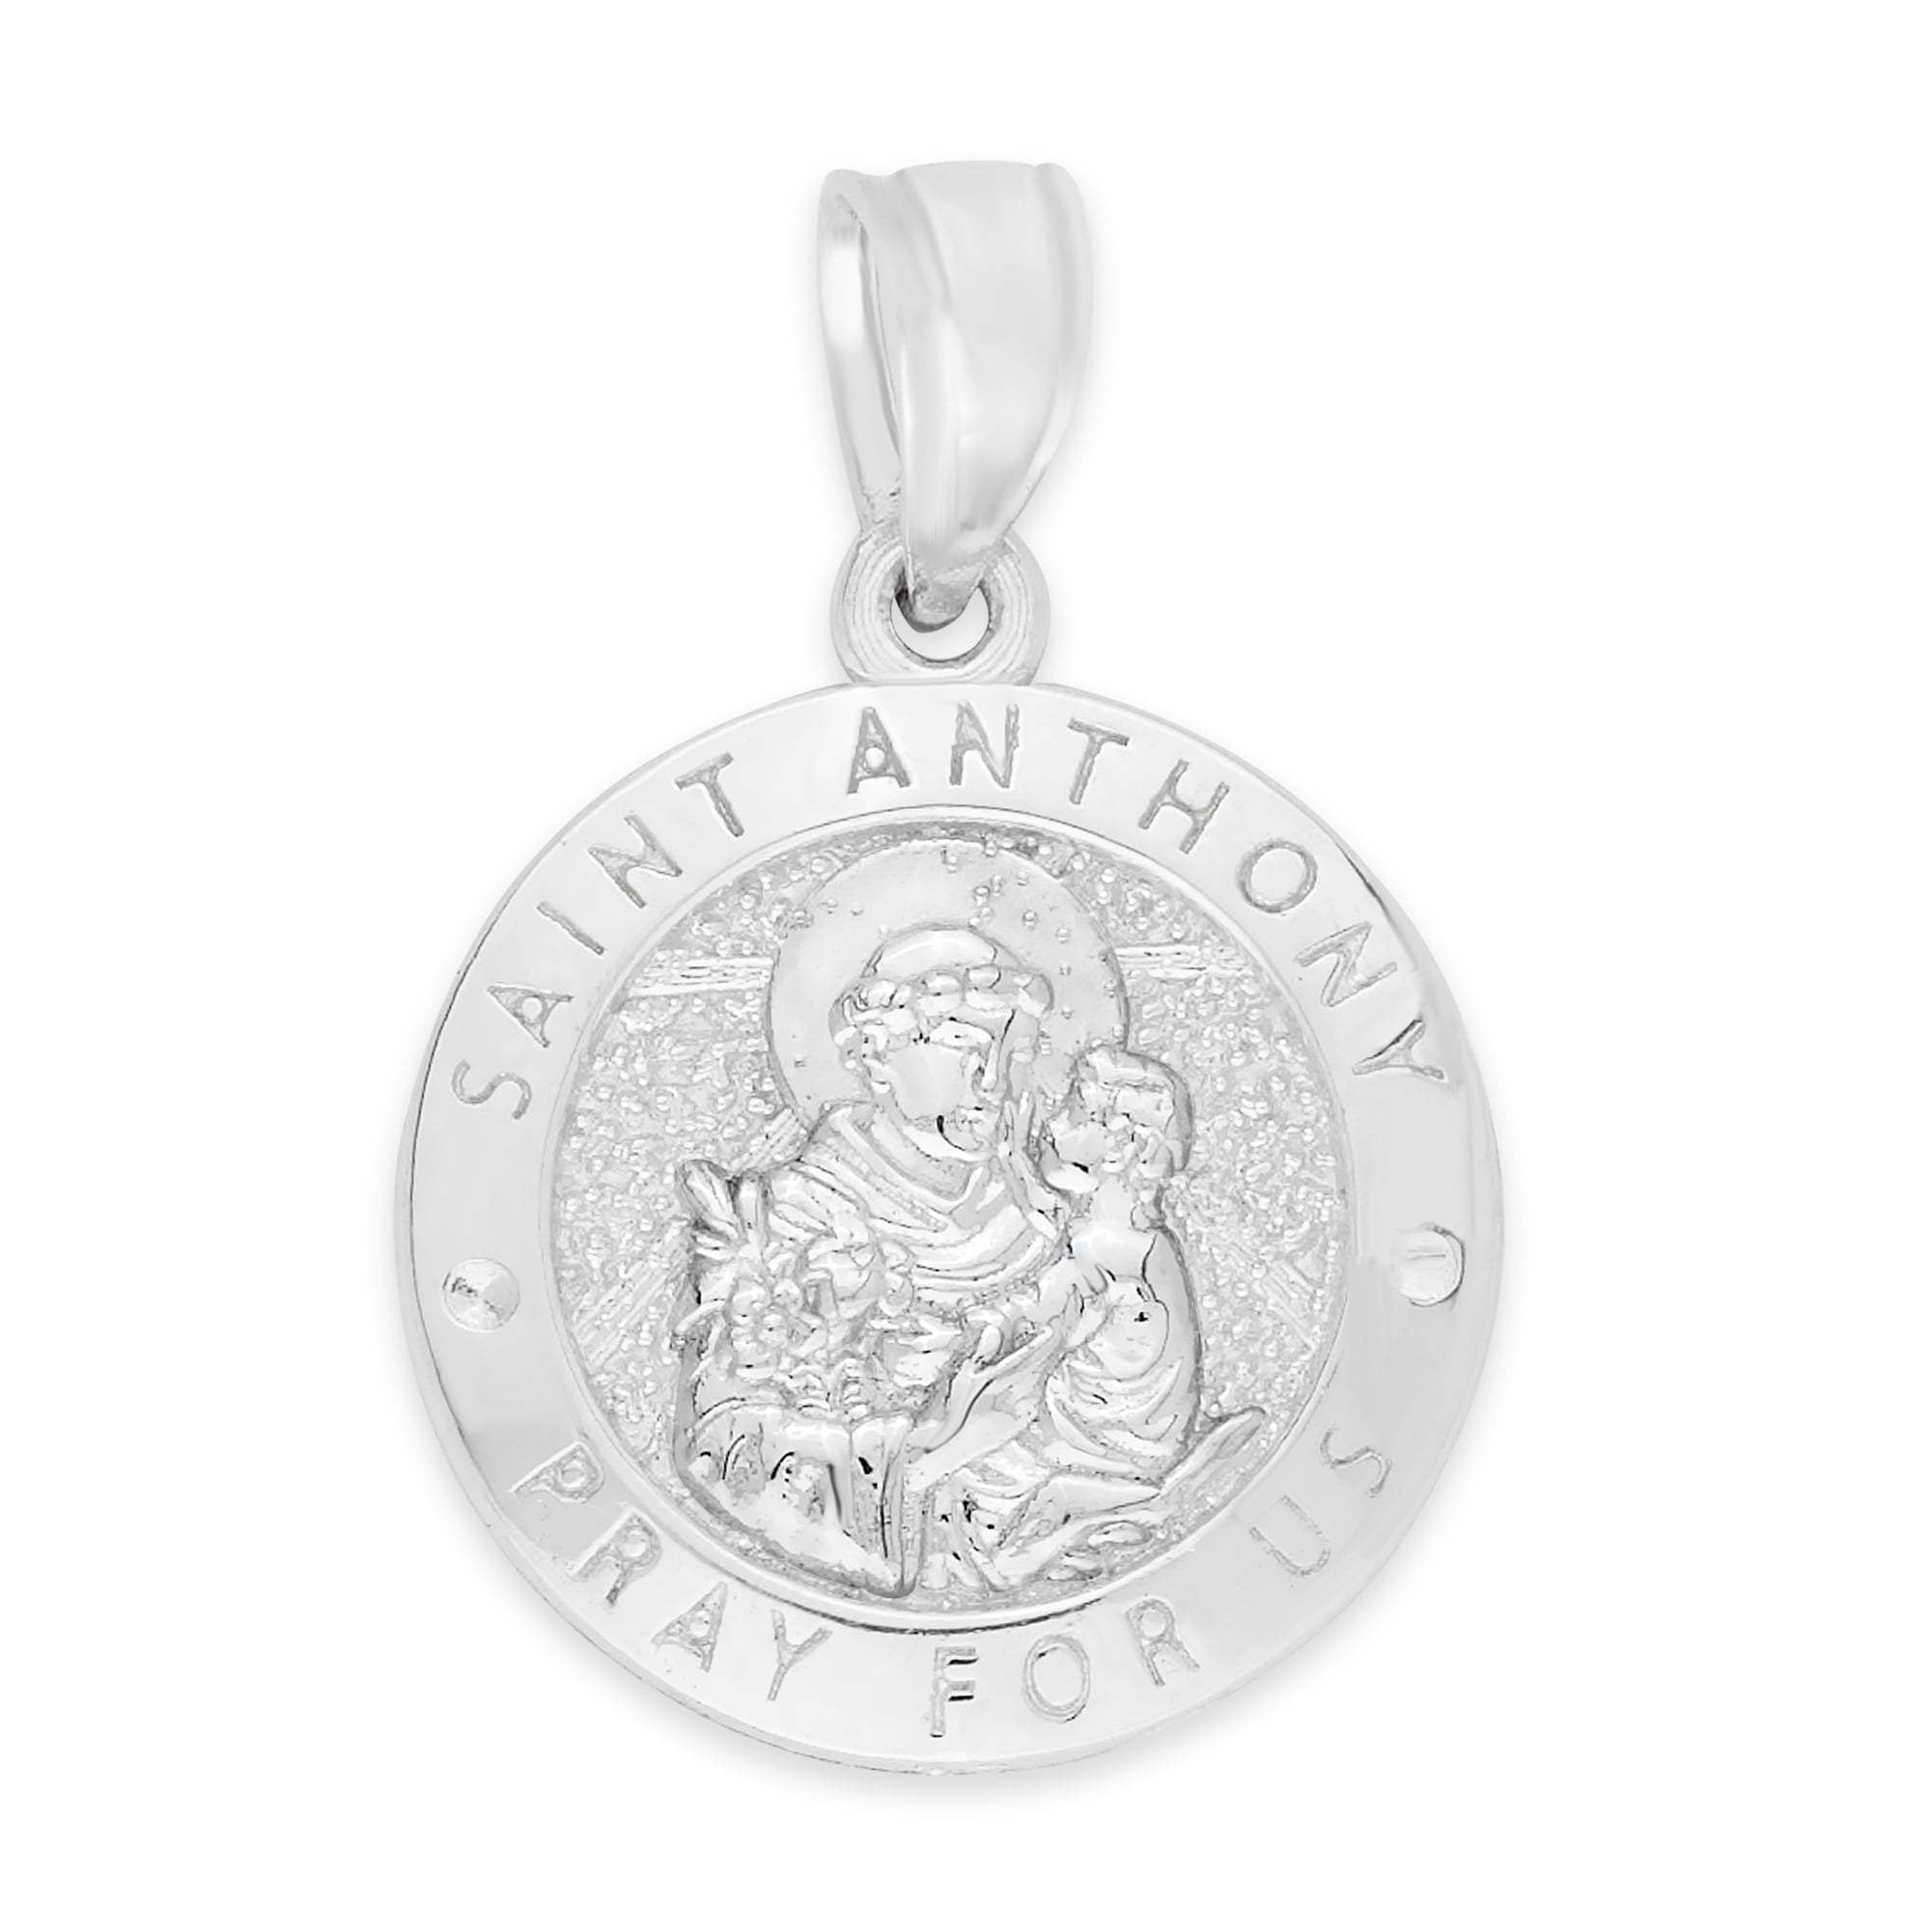 Solid 925 Sterling Silver Catholic Patron Saint Christopher Pendant Charm  Medal - 23mm x 15mm